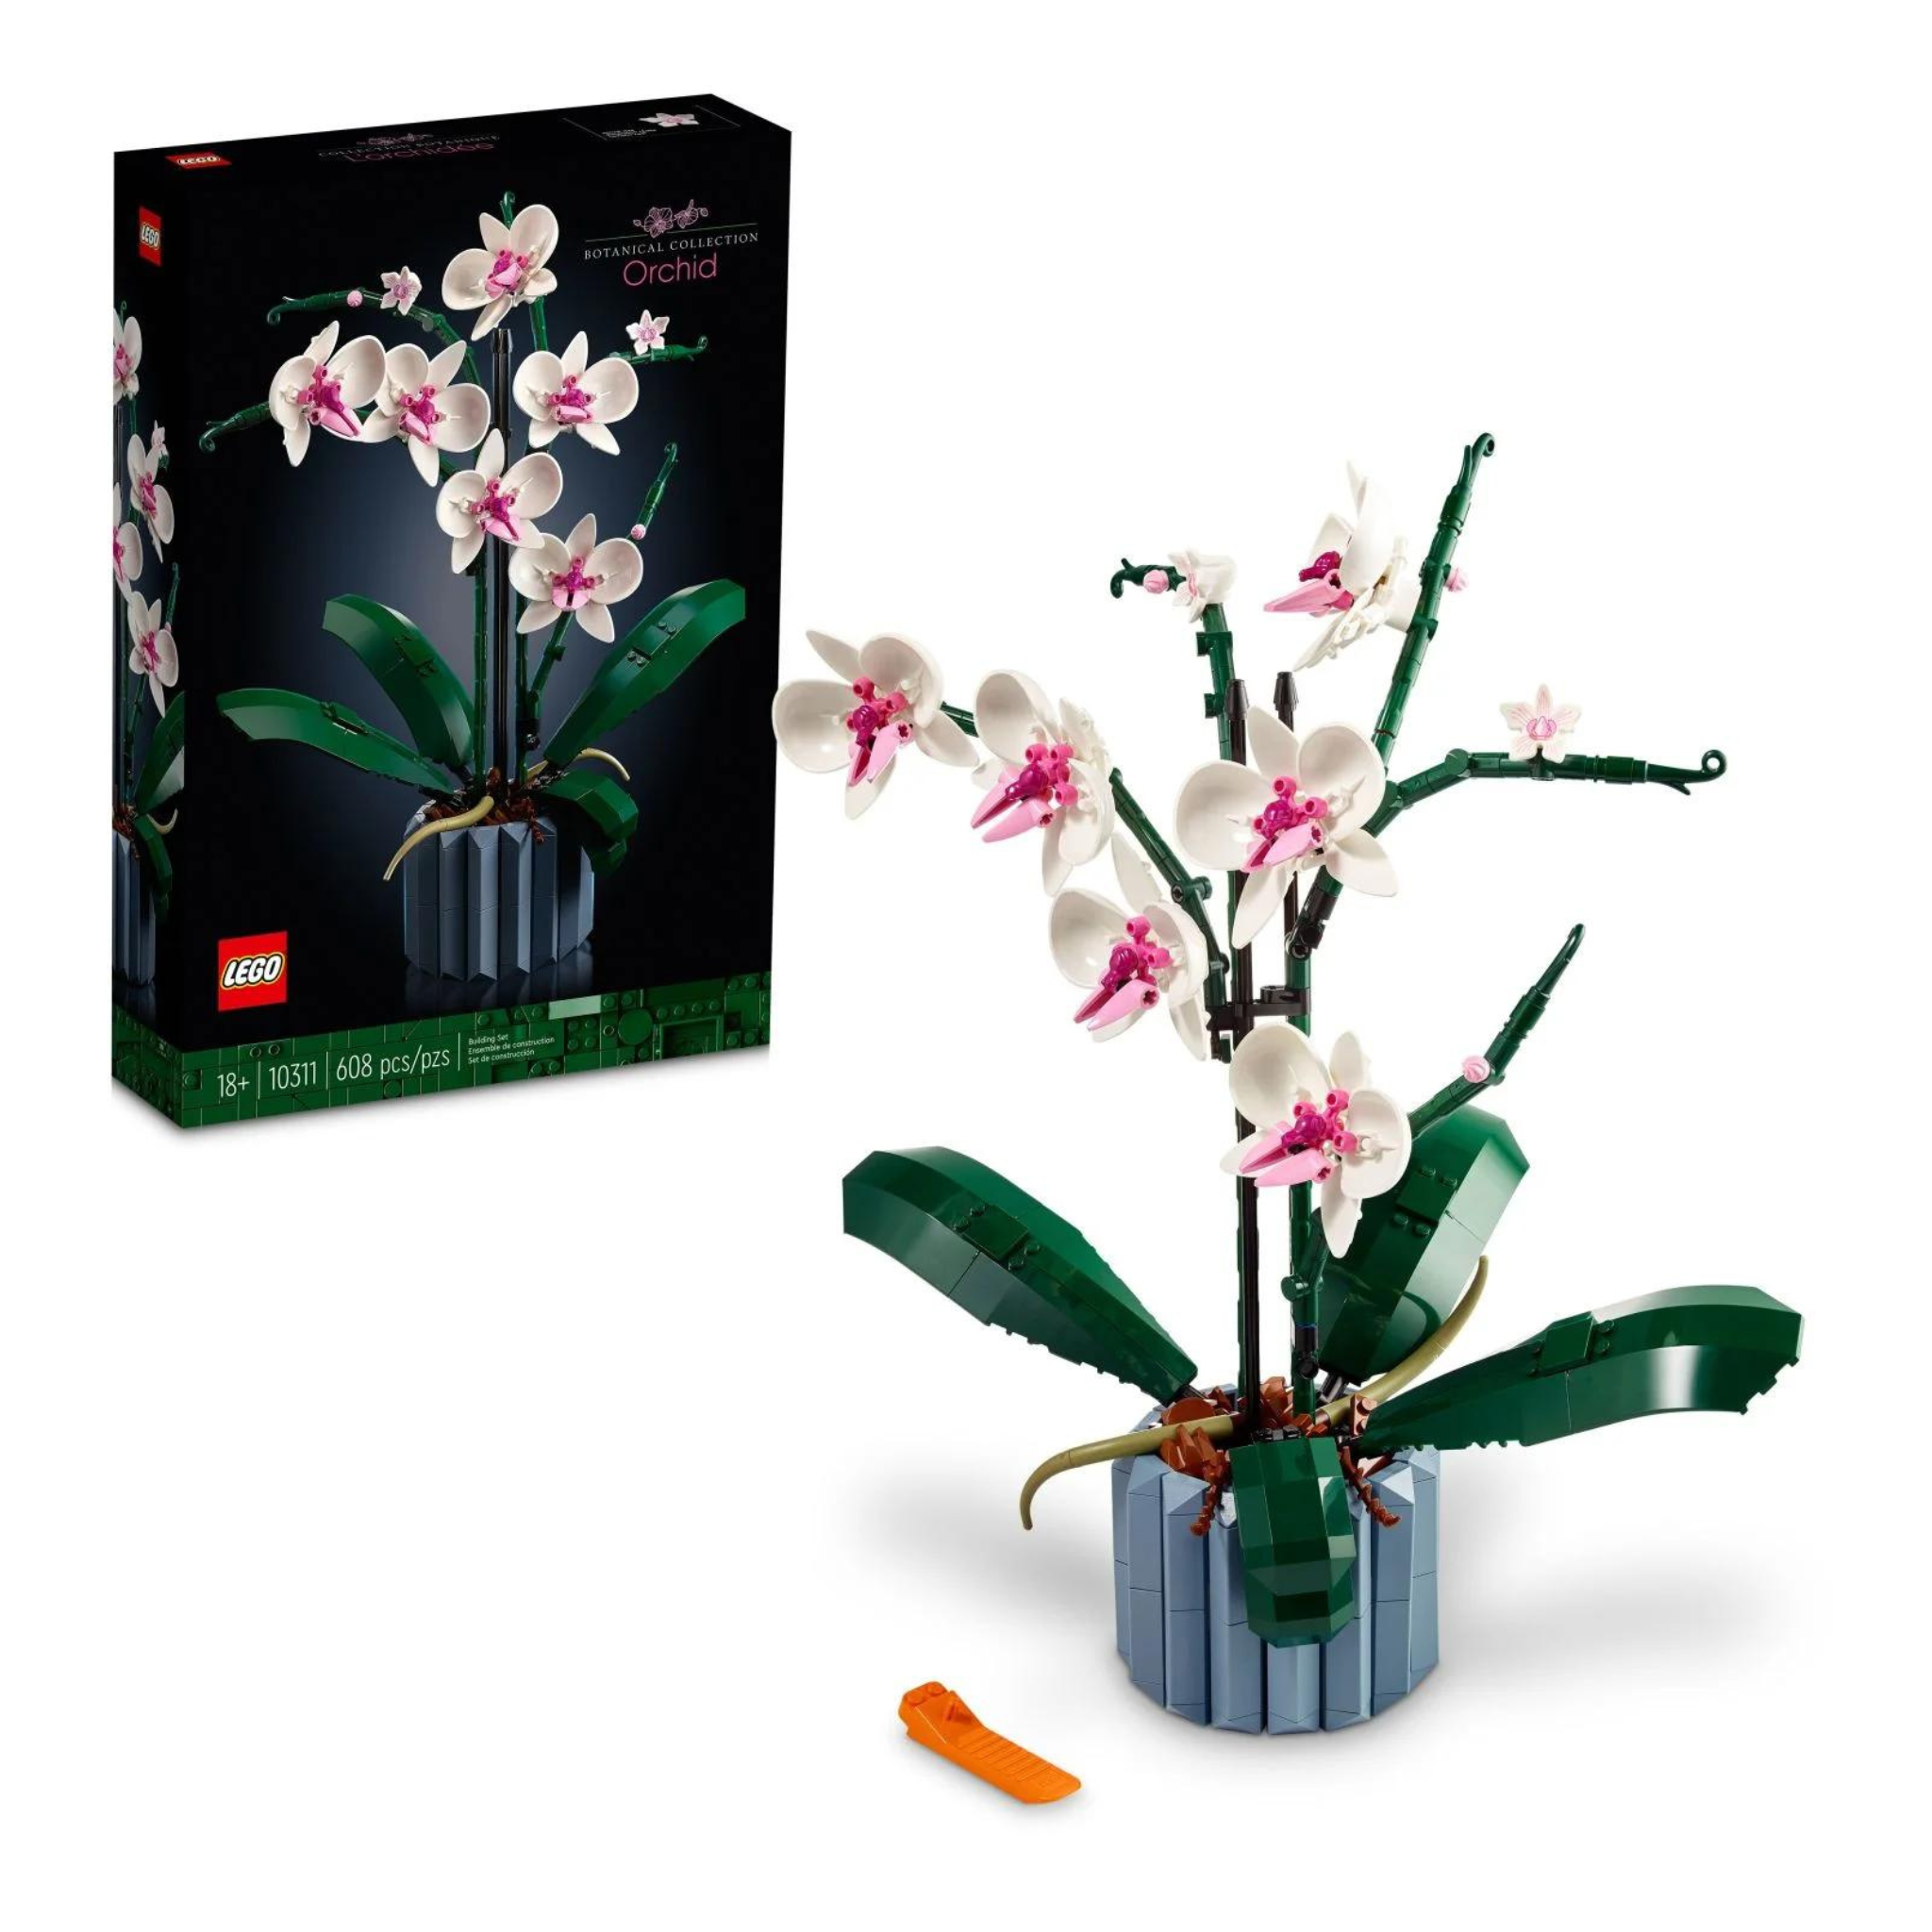 LEGO Icons Orchid 10311 Artificial Plant Building Set w/ Flowers